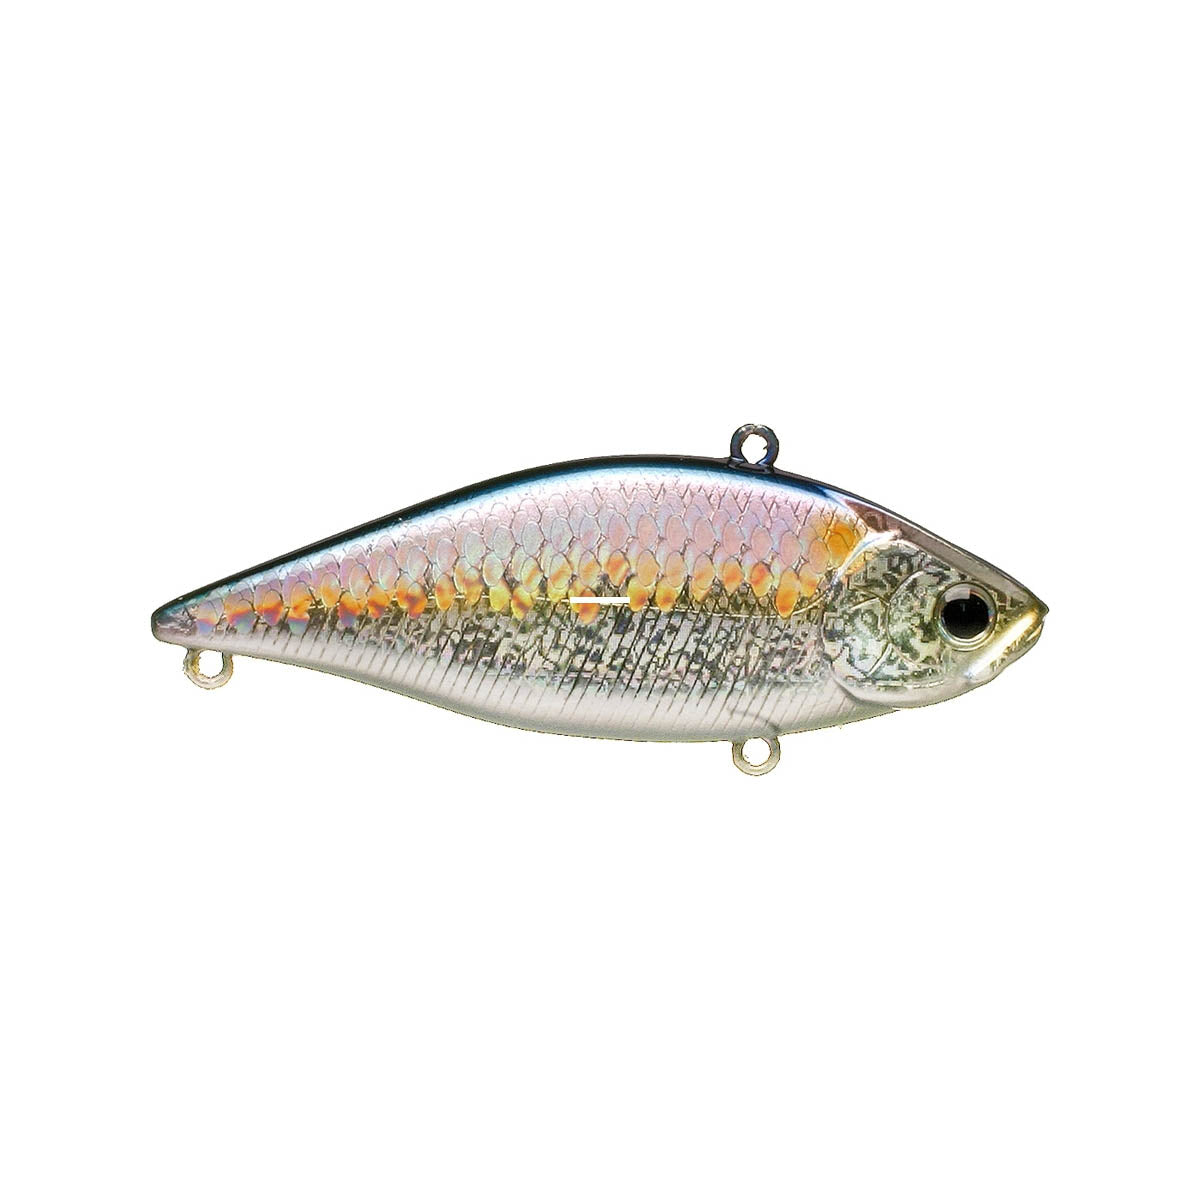 Buy ms-american-shad LUCKY CRAFT LV 500